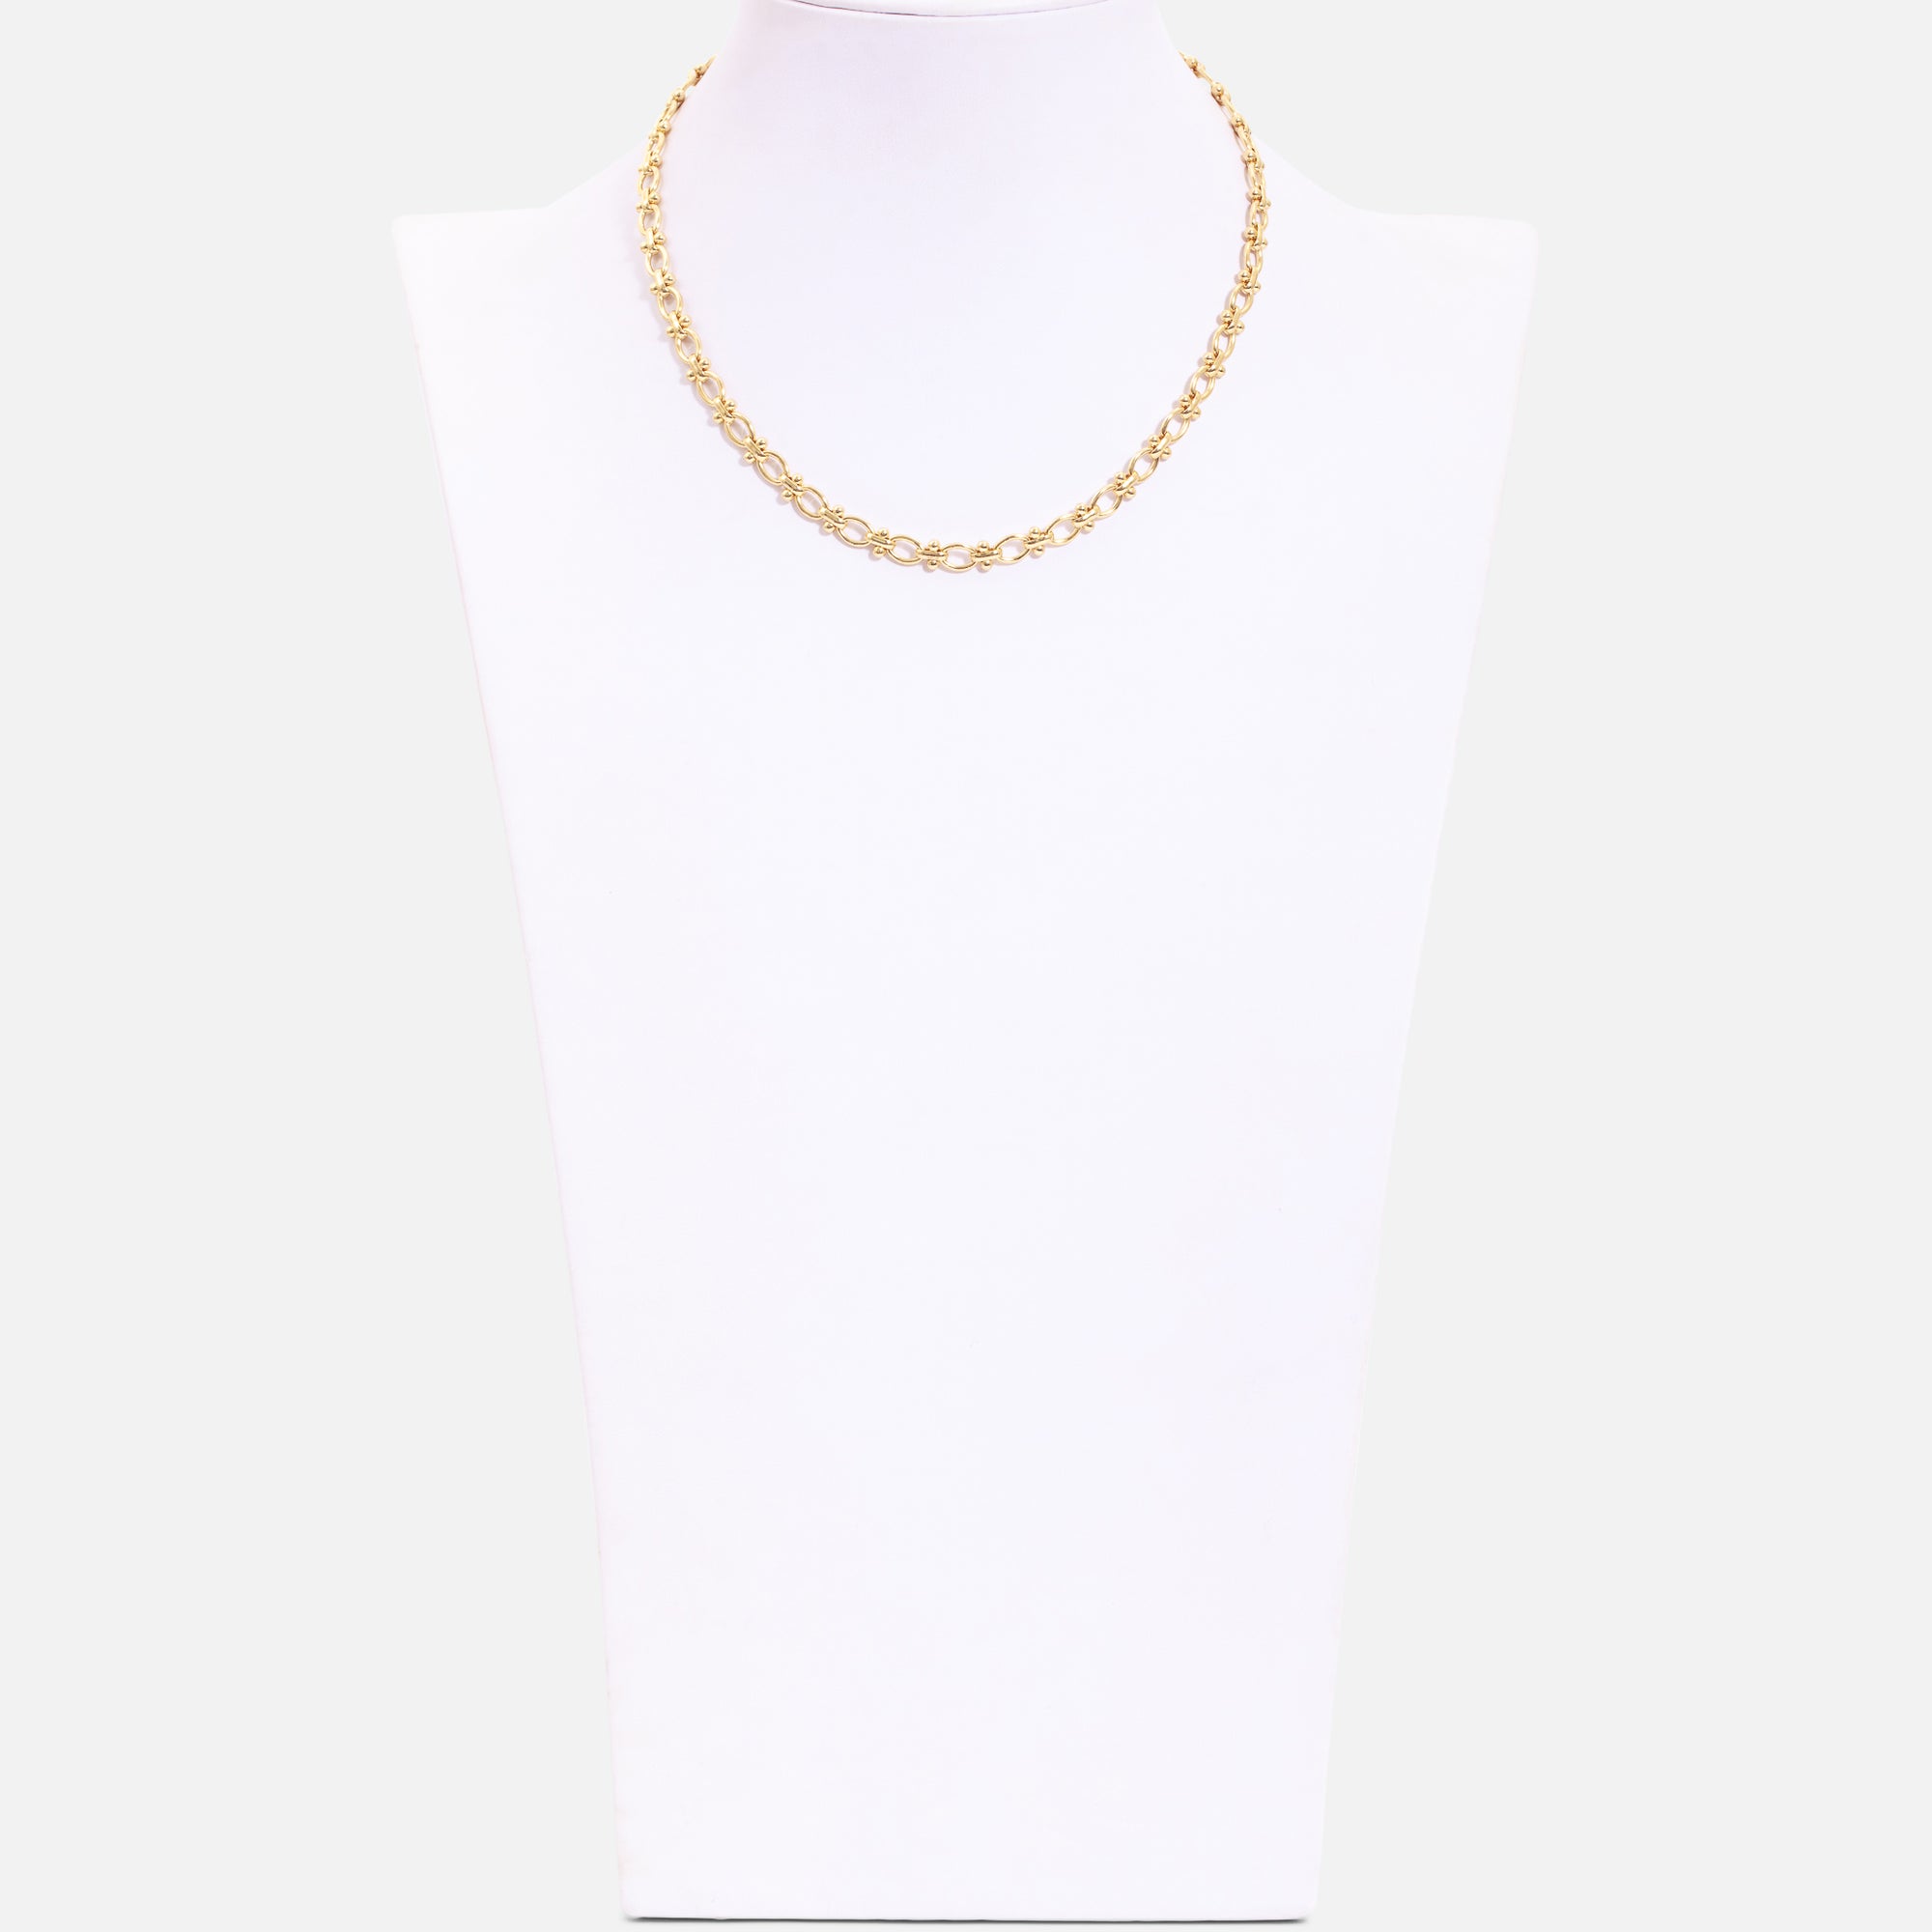 Golden necklace with wide links 18 inches